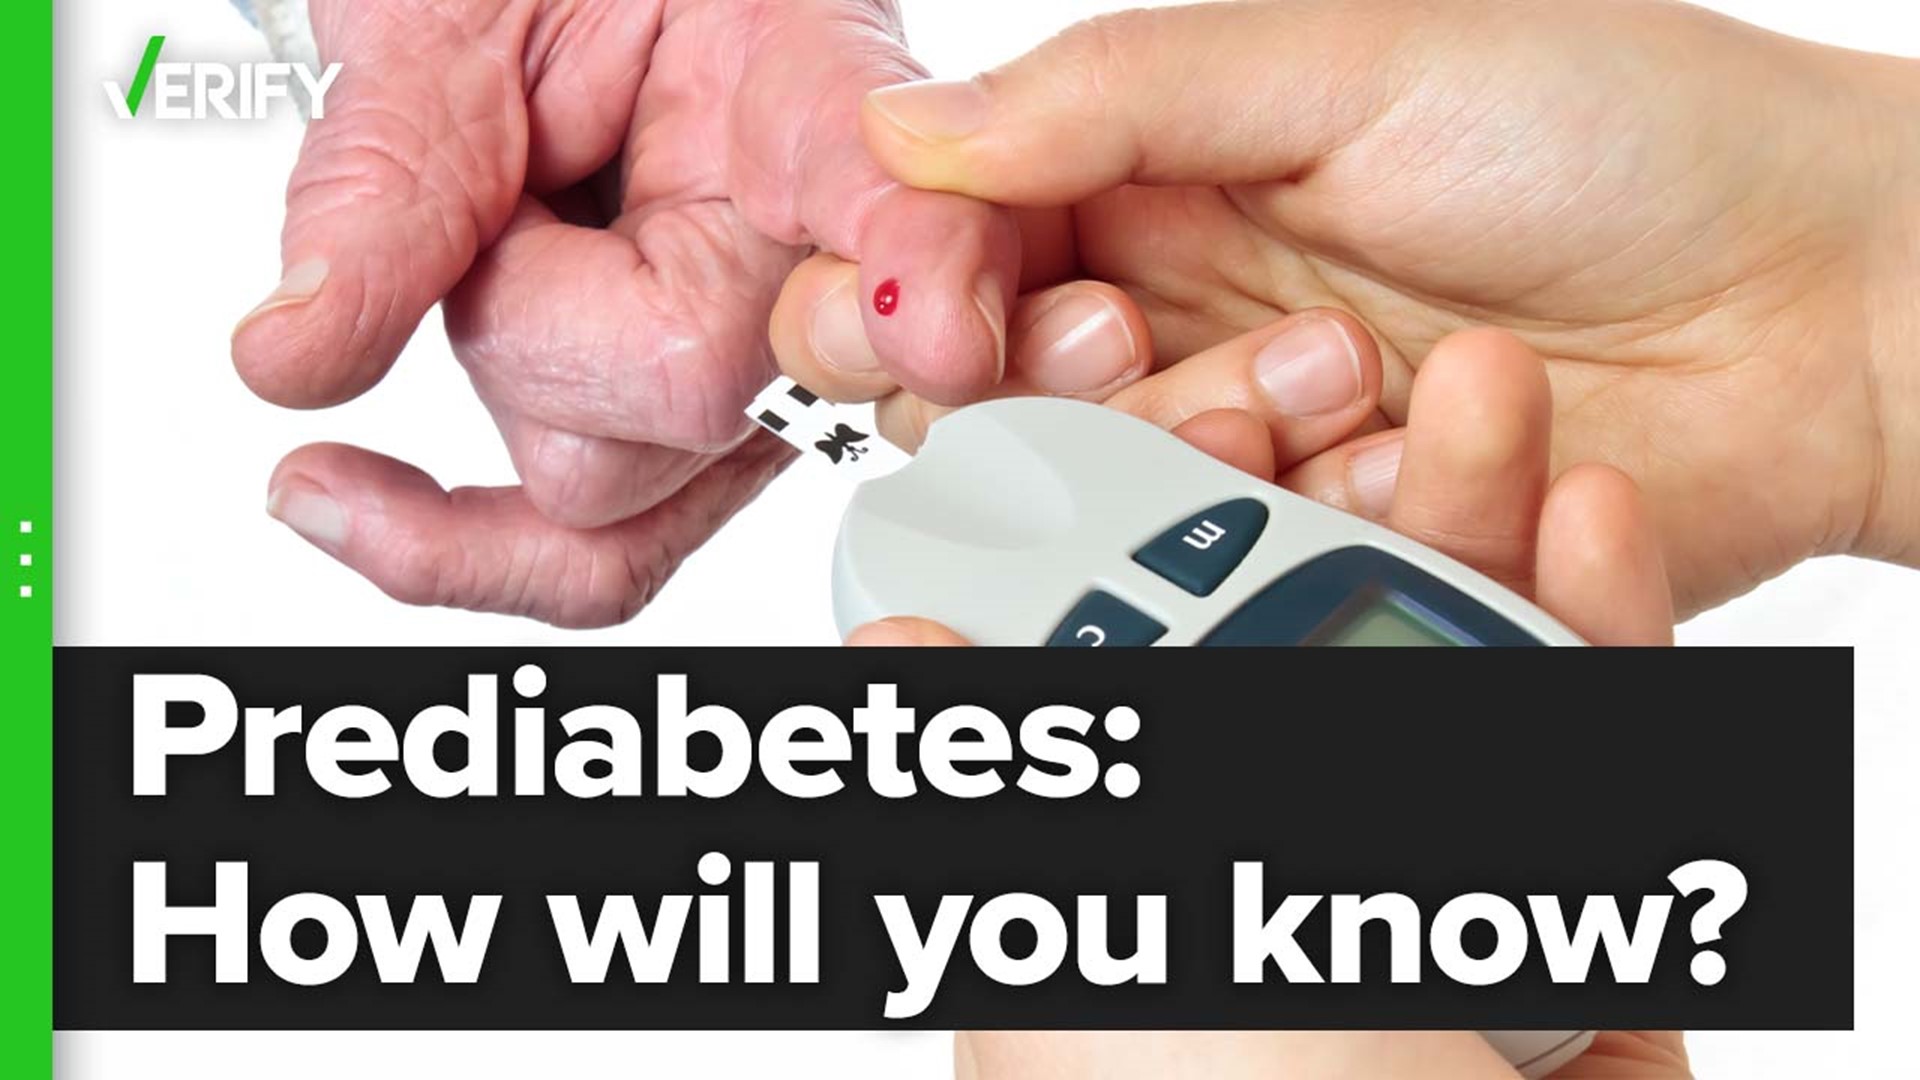 There isn’t a way for people to know if they’re prediabetic without a test